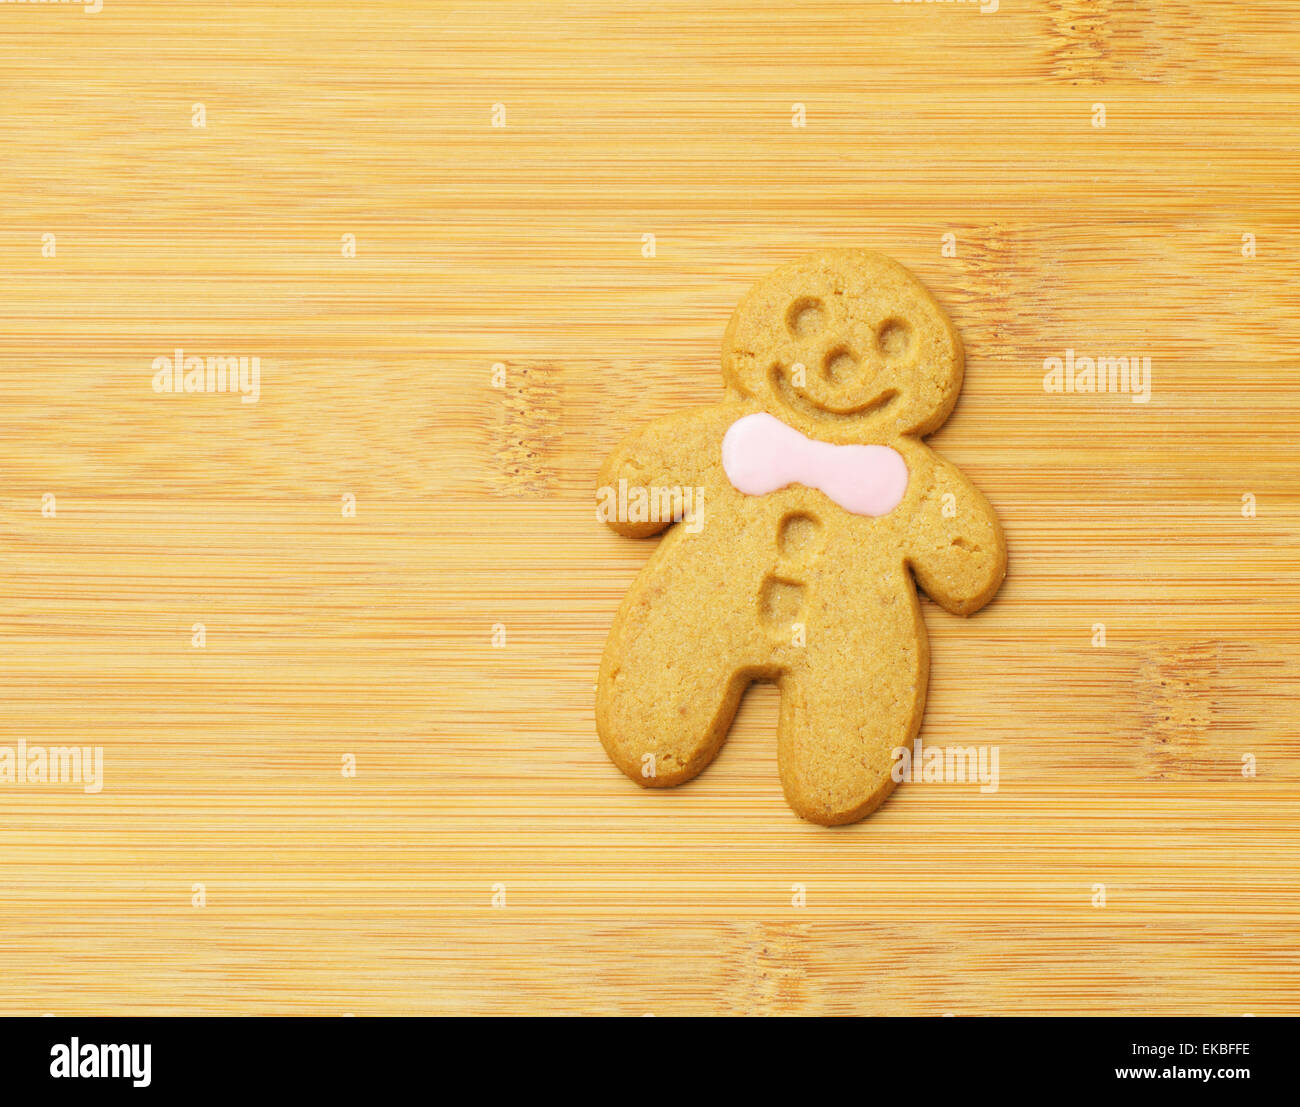 Gingerbread Man cookie for xmas Stock Photo